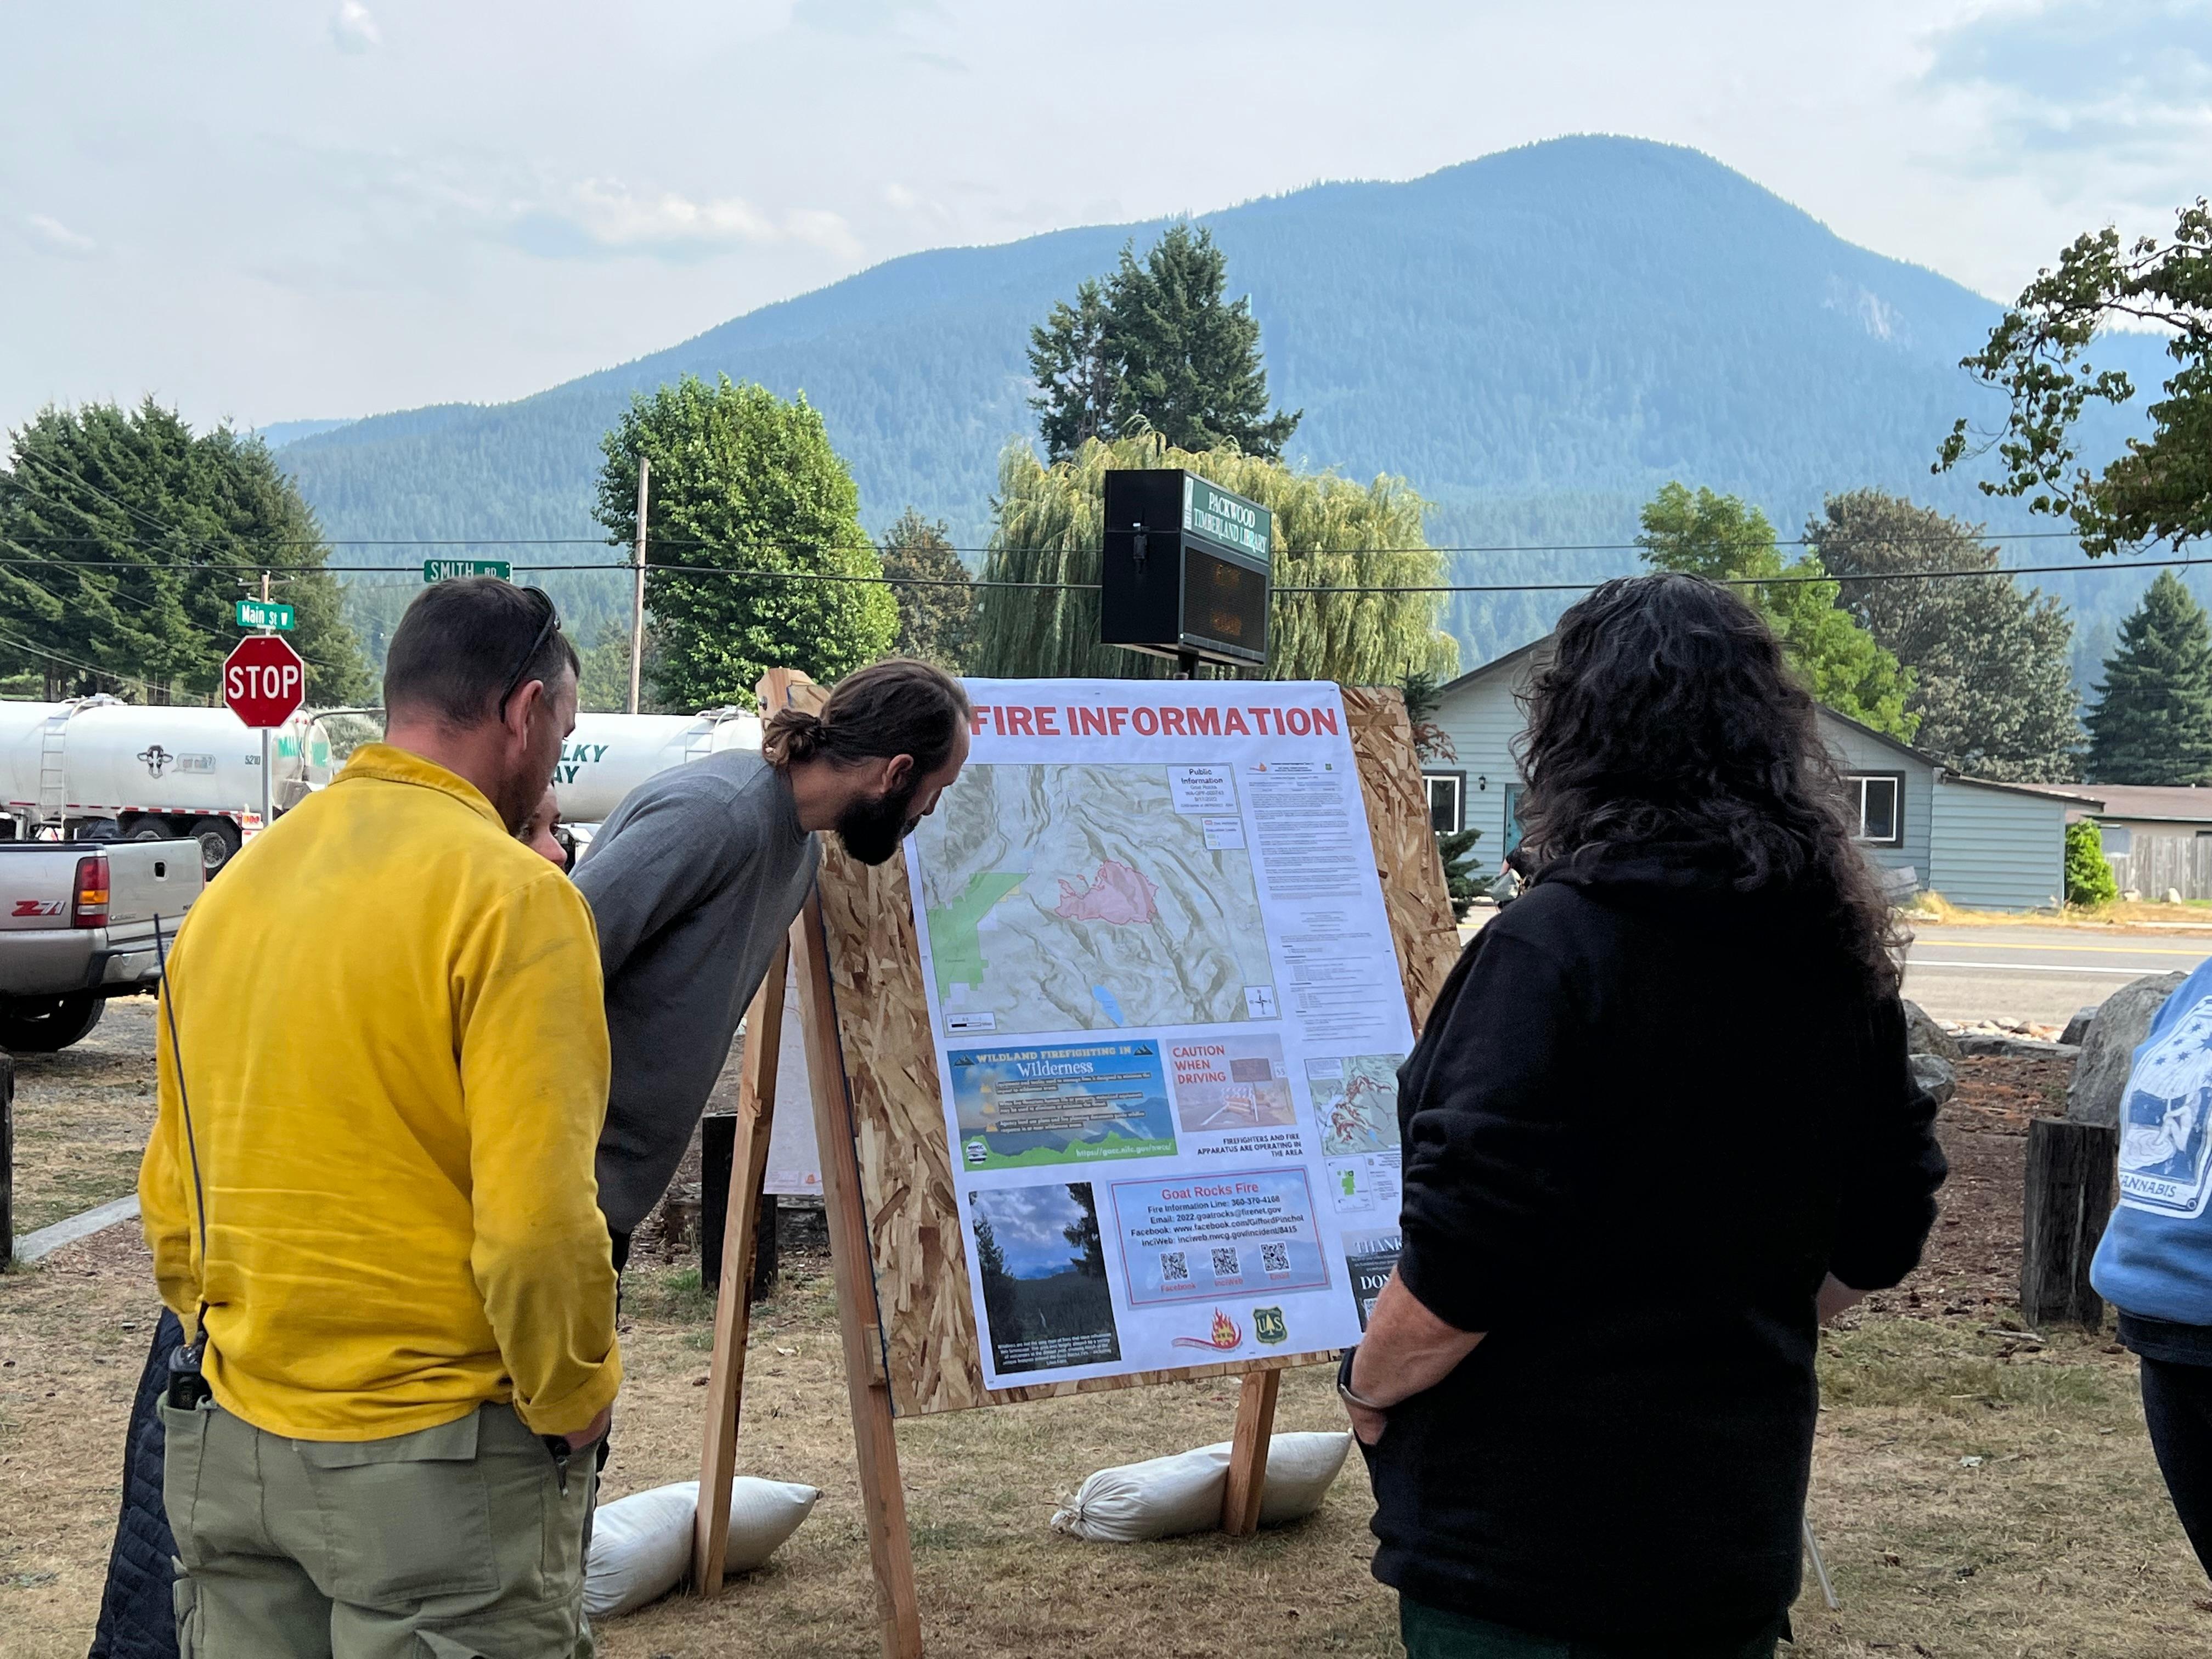 Members of the public stop and talk with a Public Information Officer at an Information board. The board was set up for the Packwood Farmer's Market to inform and answer questions anyone may have.